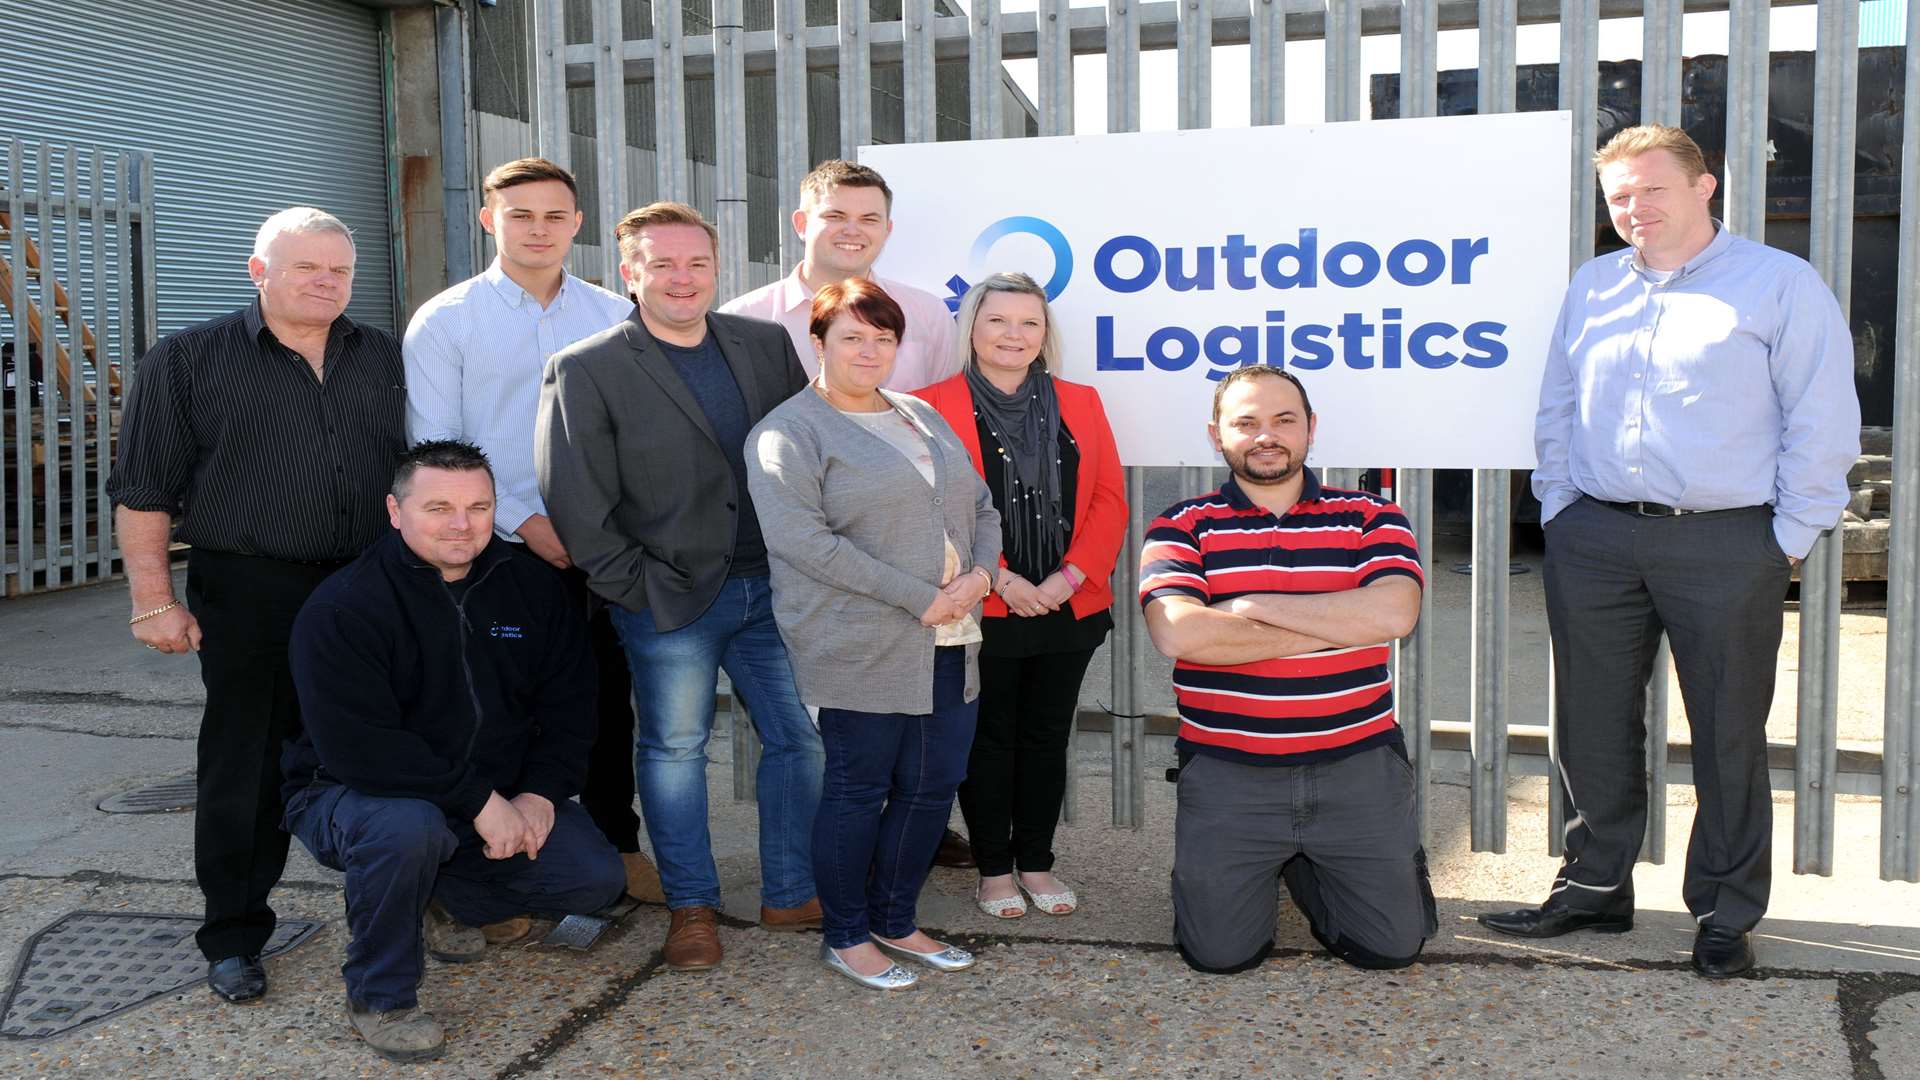 Some of the Outdoor Logistics team